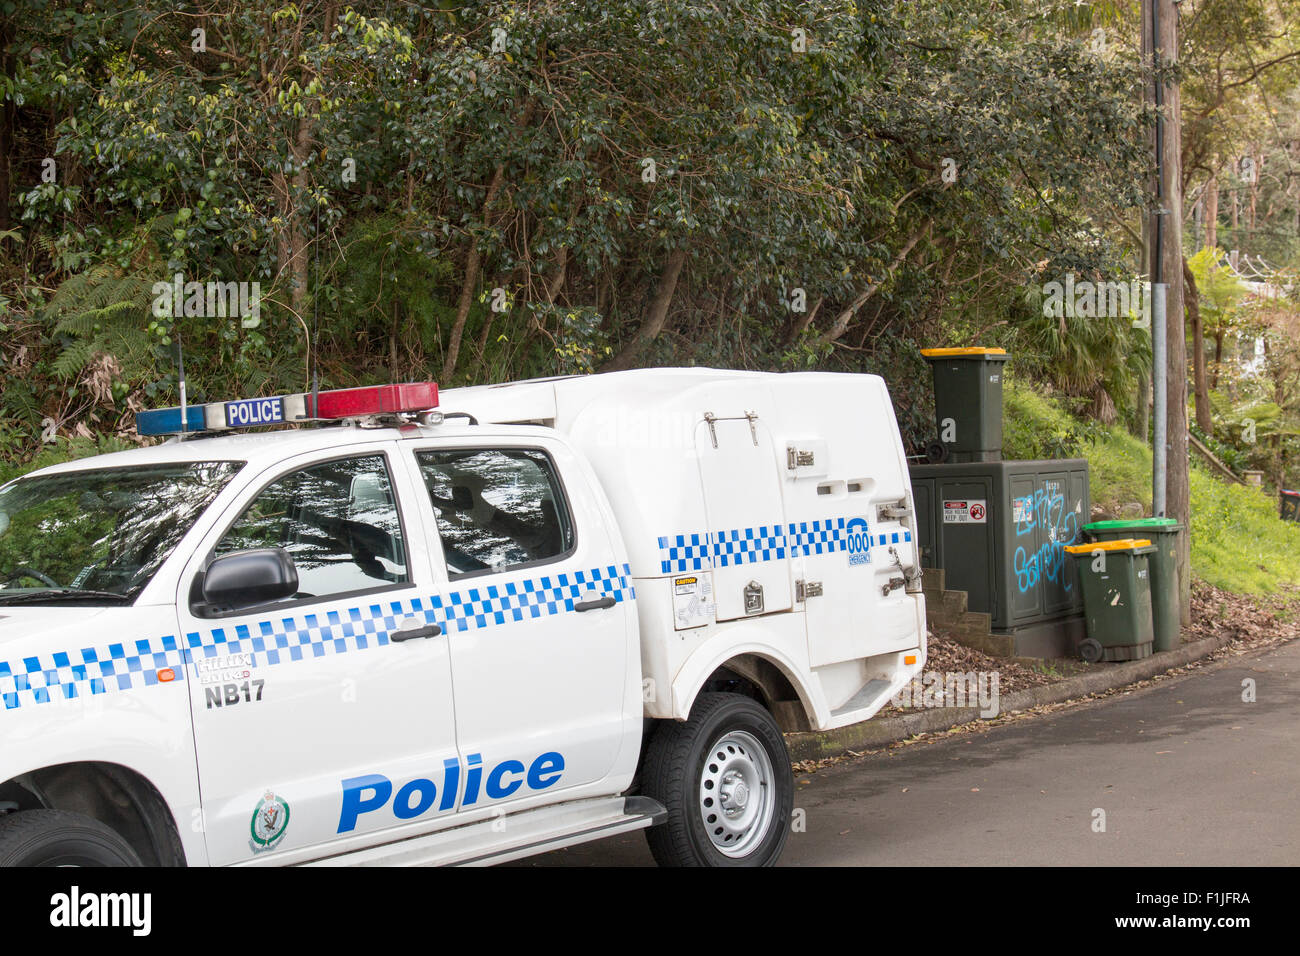 New South Wales police force vehicle transport in Sydney,Australia Stock Photo